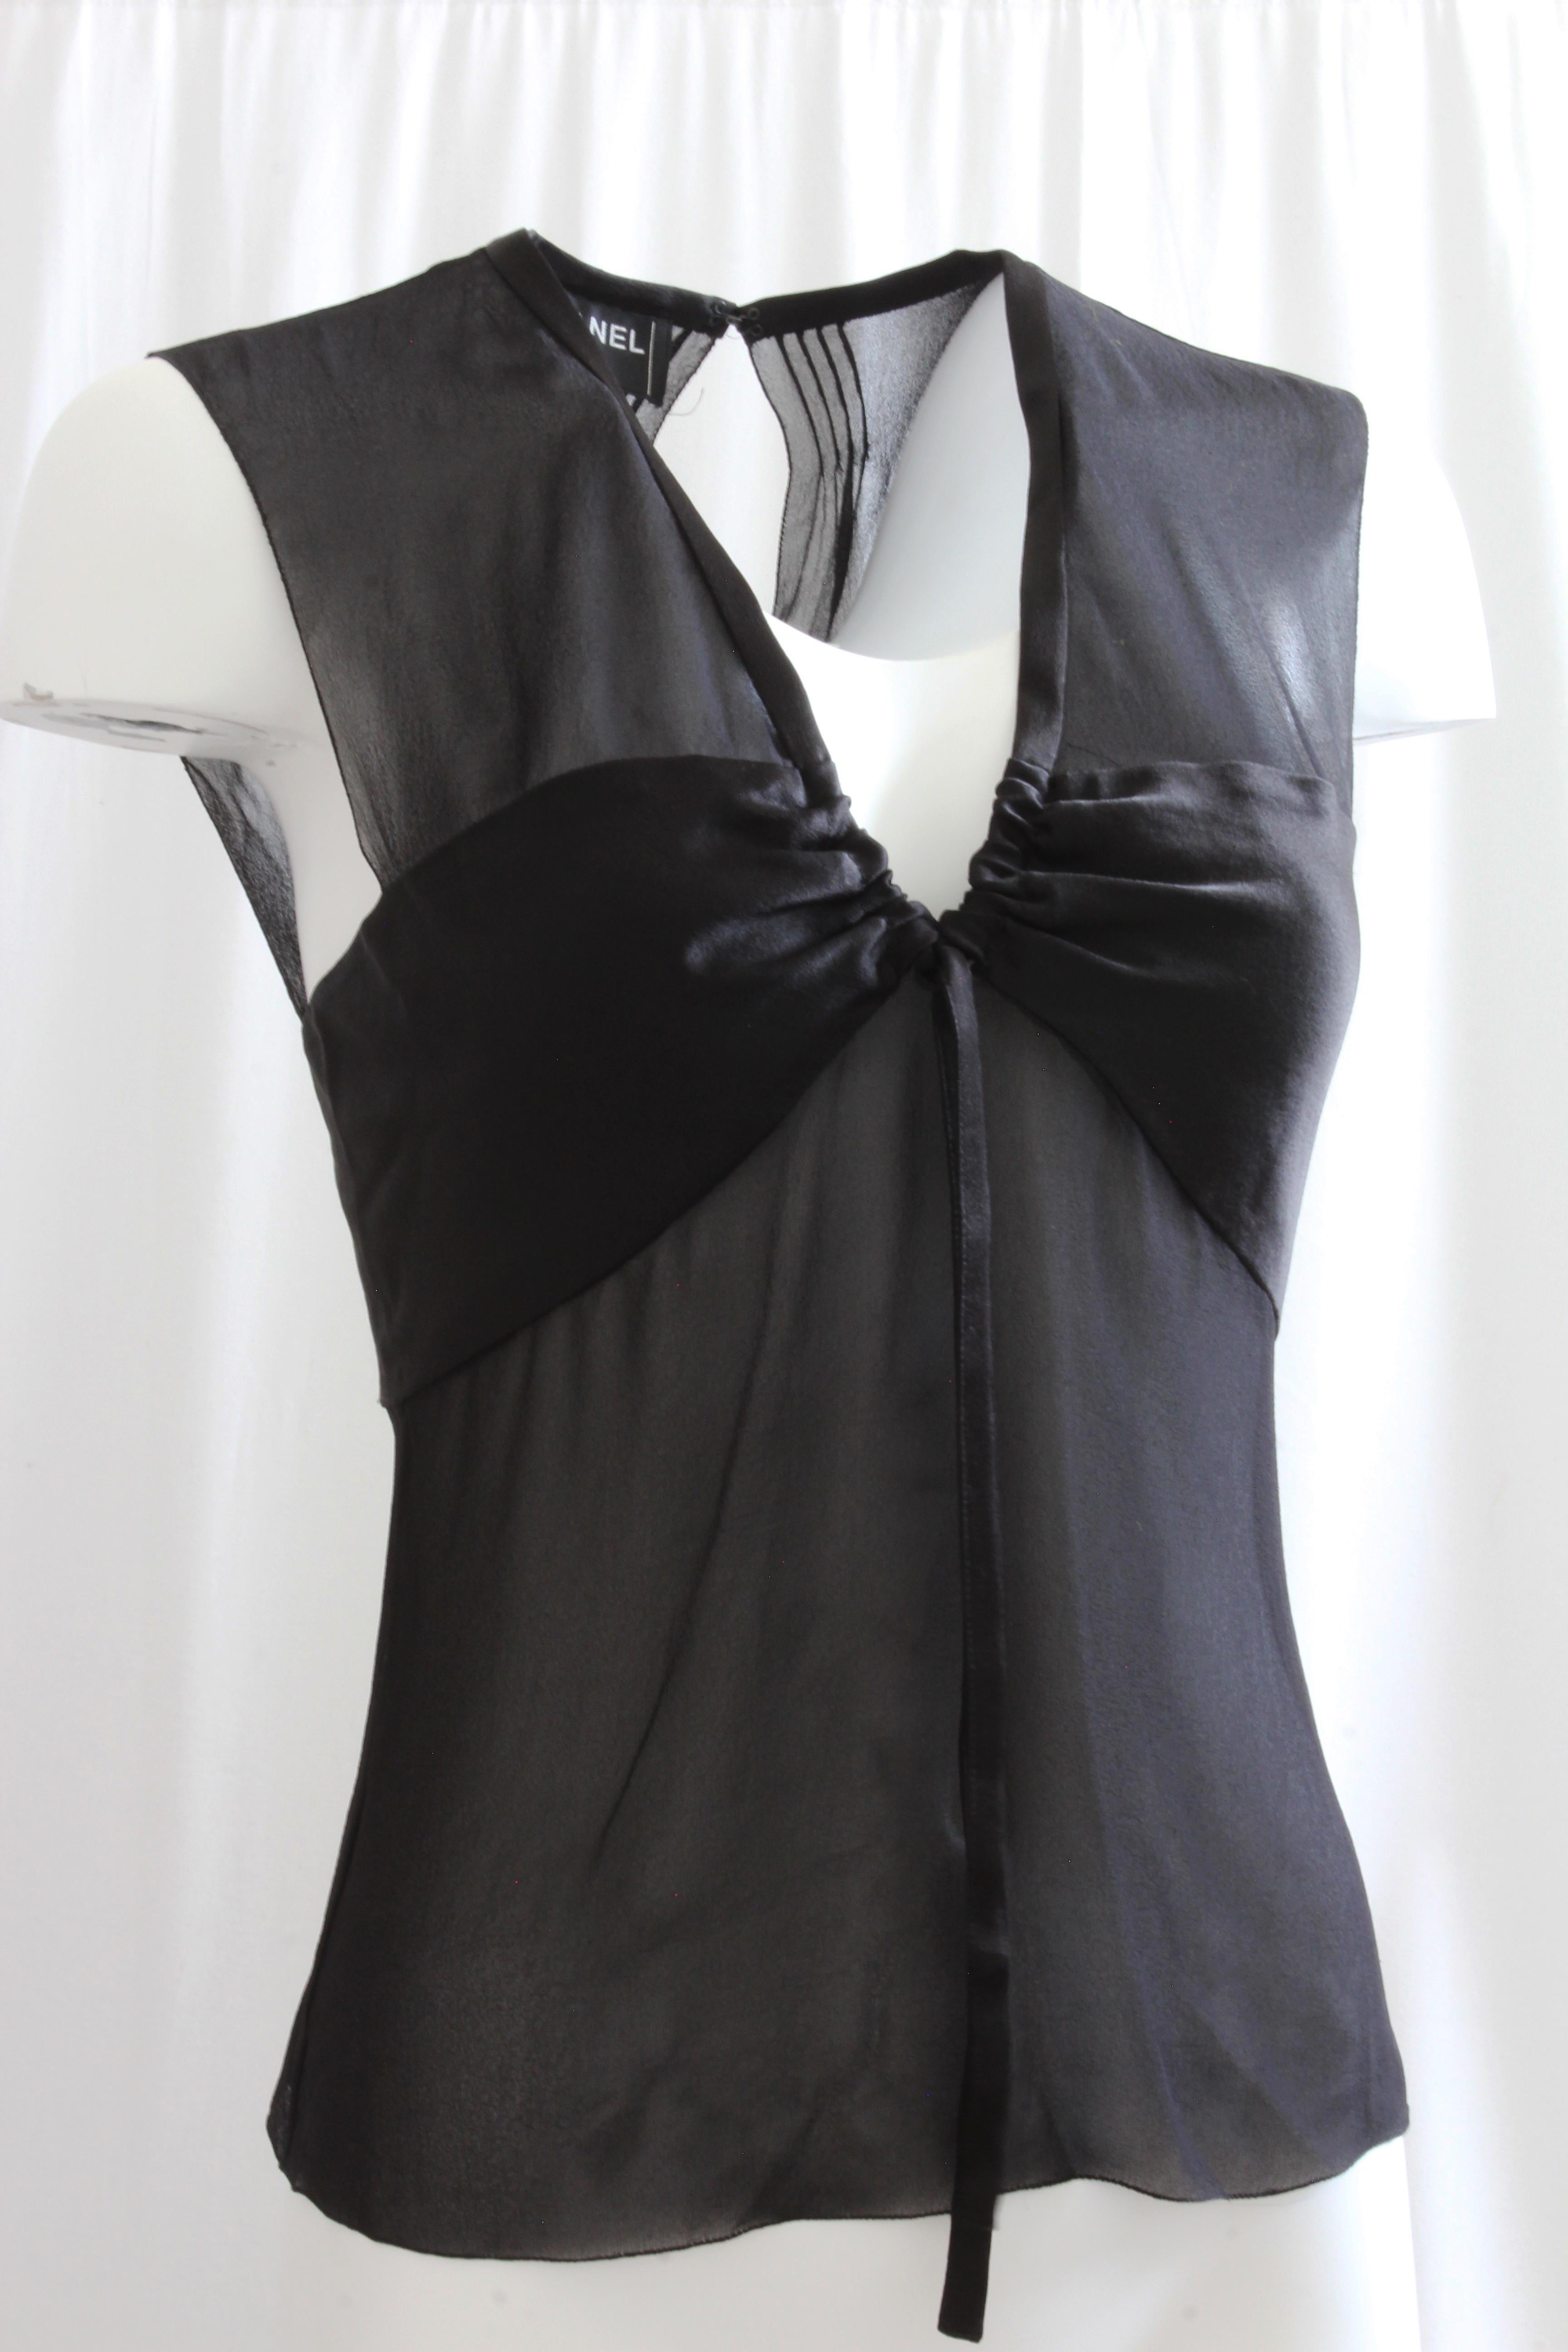 Gray Chanel Sheer Silk Chiffon and Satin Blouse with Cinched Collar and Open Back S